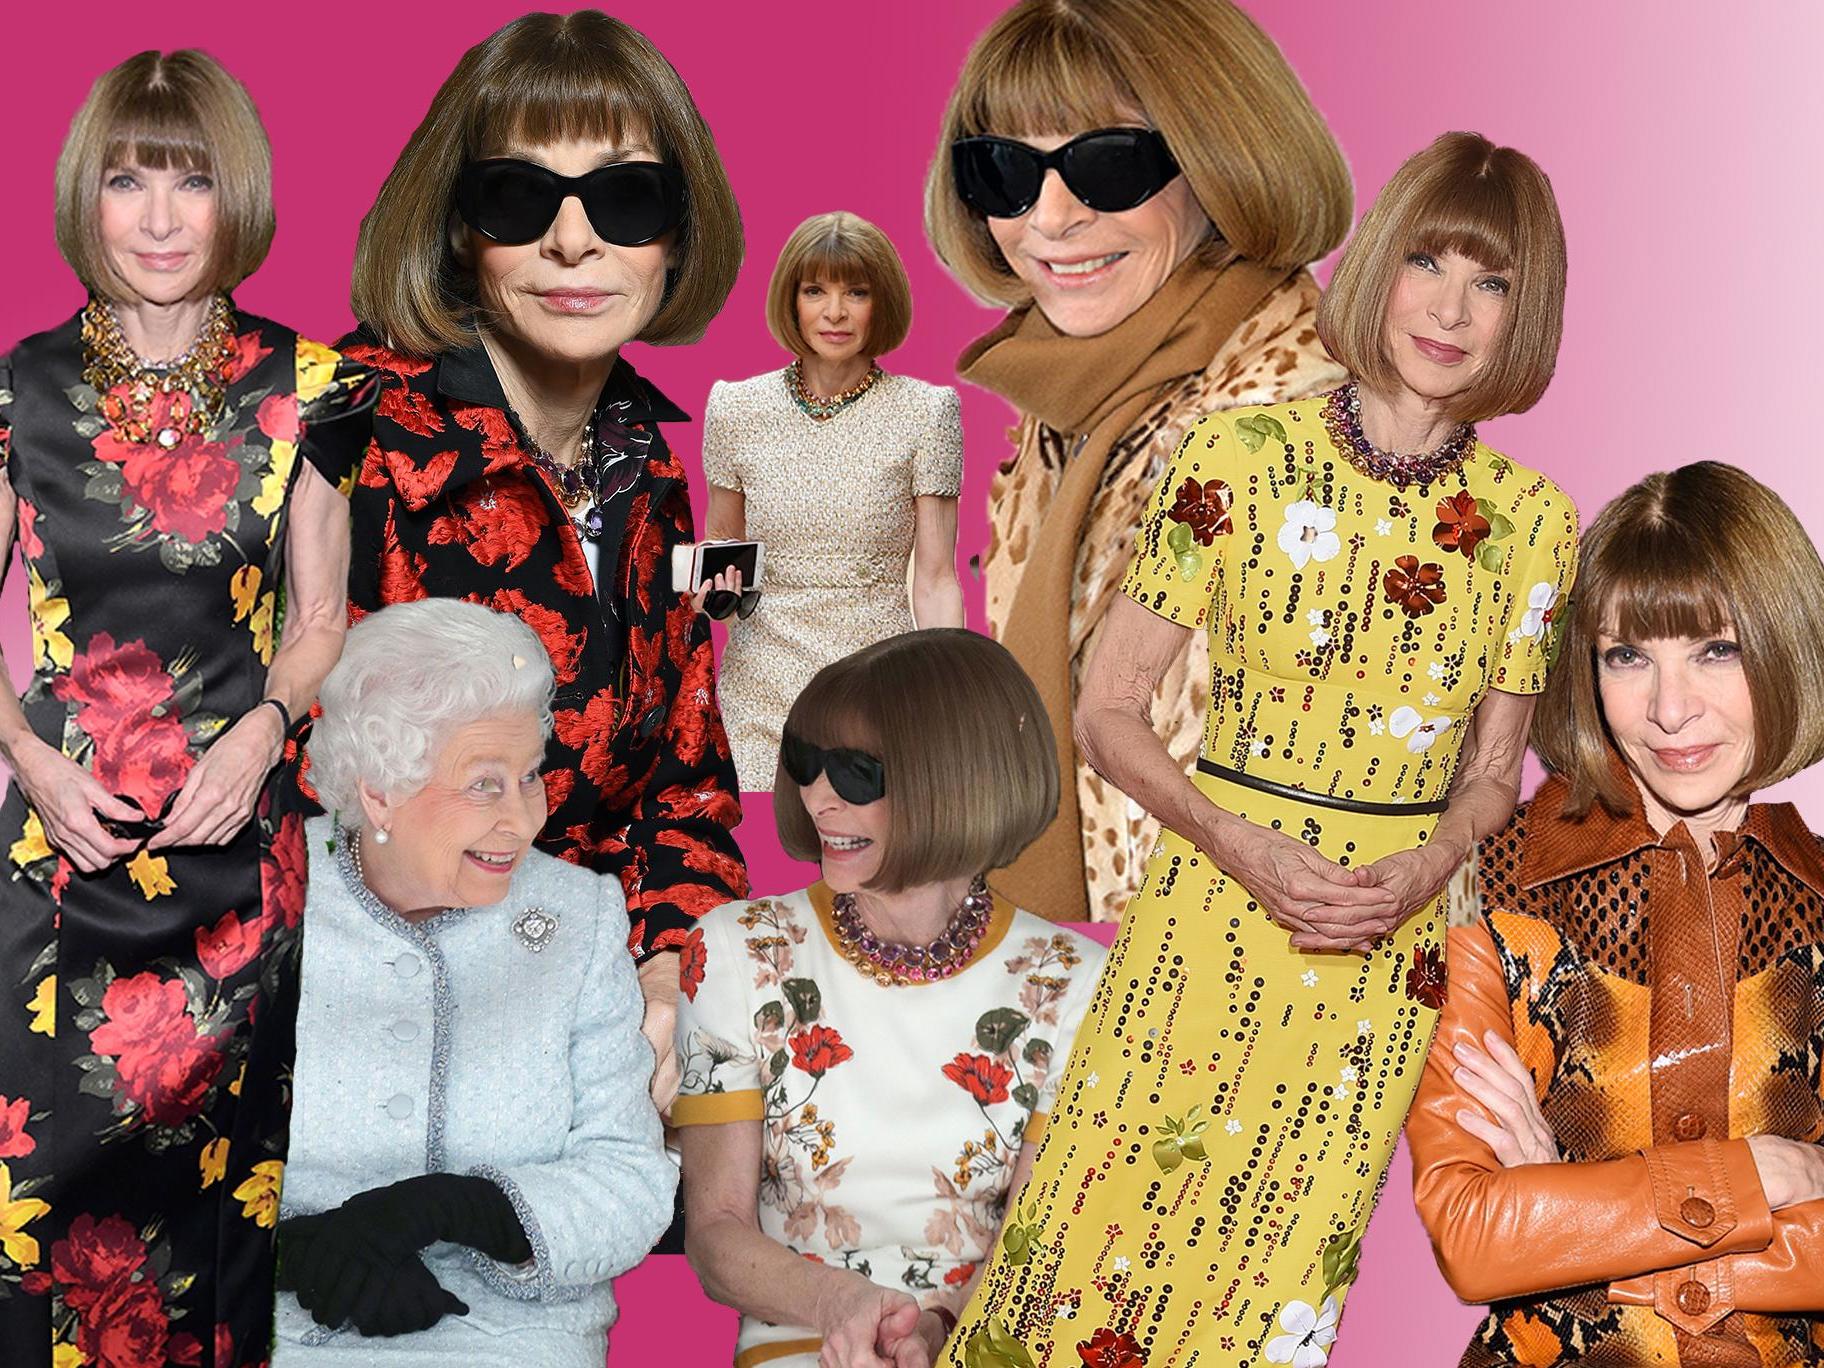 Anna Wintour At 70: Why The Us Vogue Editor Is So Important For The Fashion  Industry | The Independent